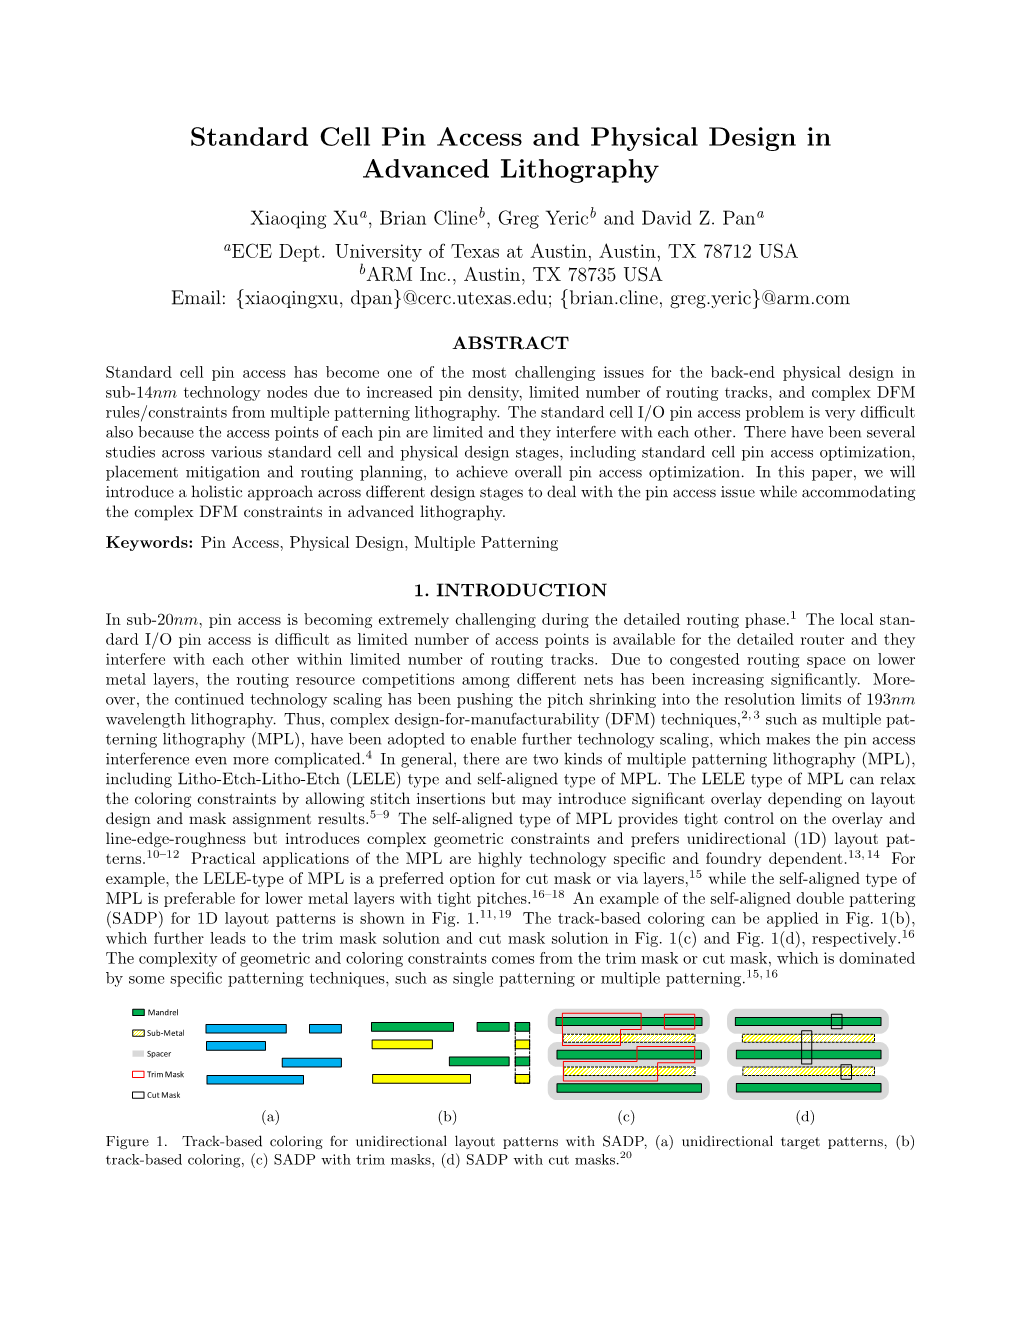 Standard Cell Pin Access and Physical Design in Advanced Lithography